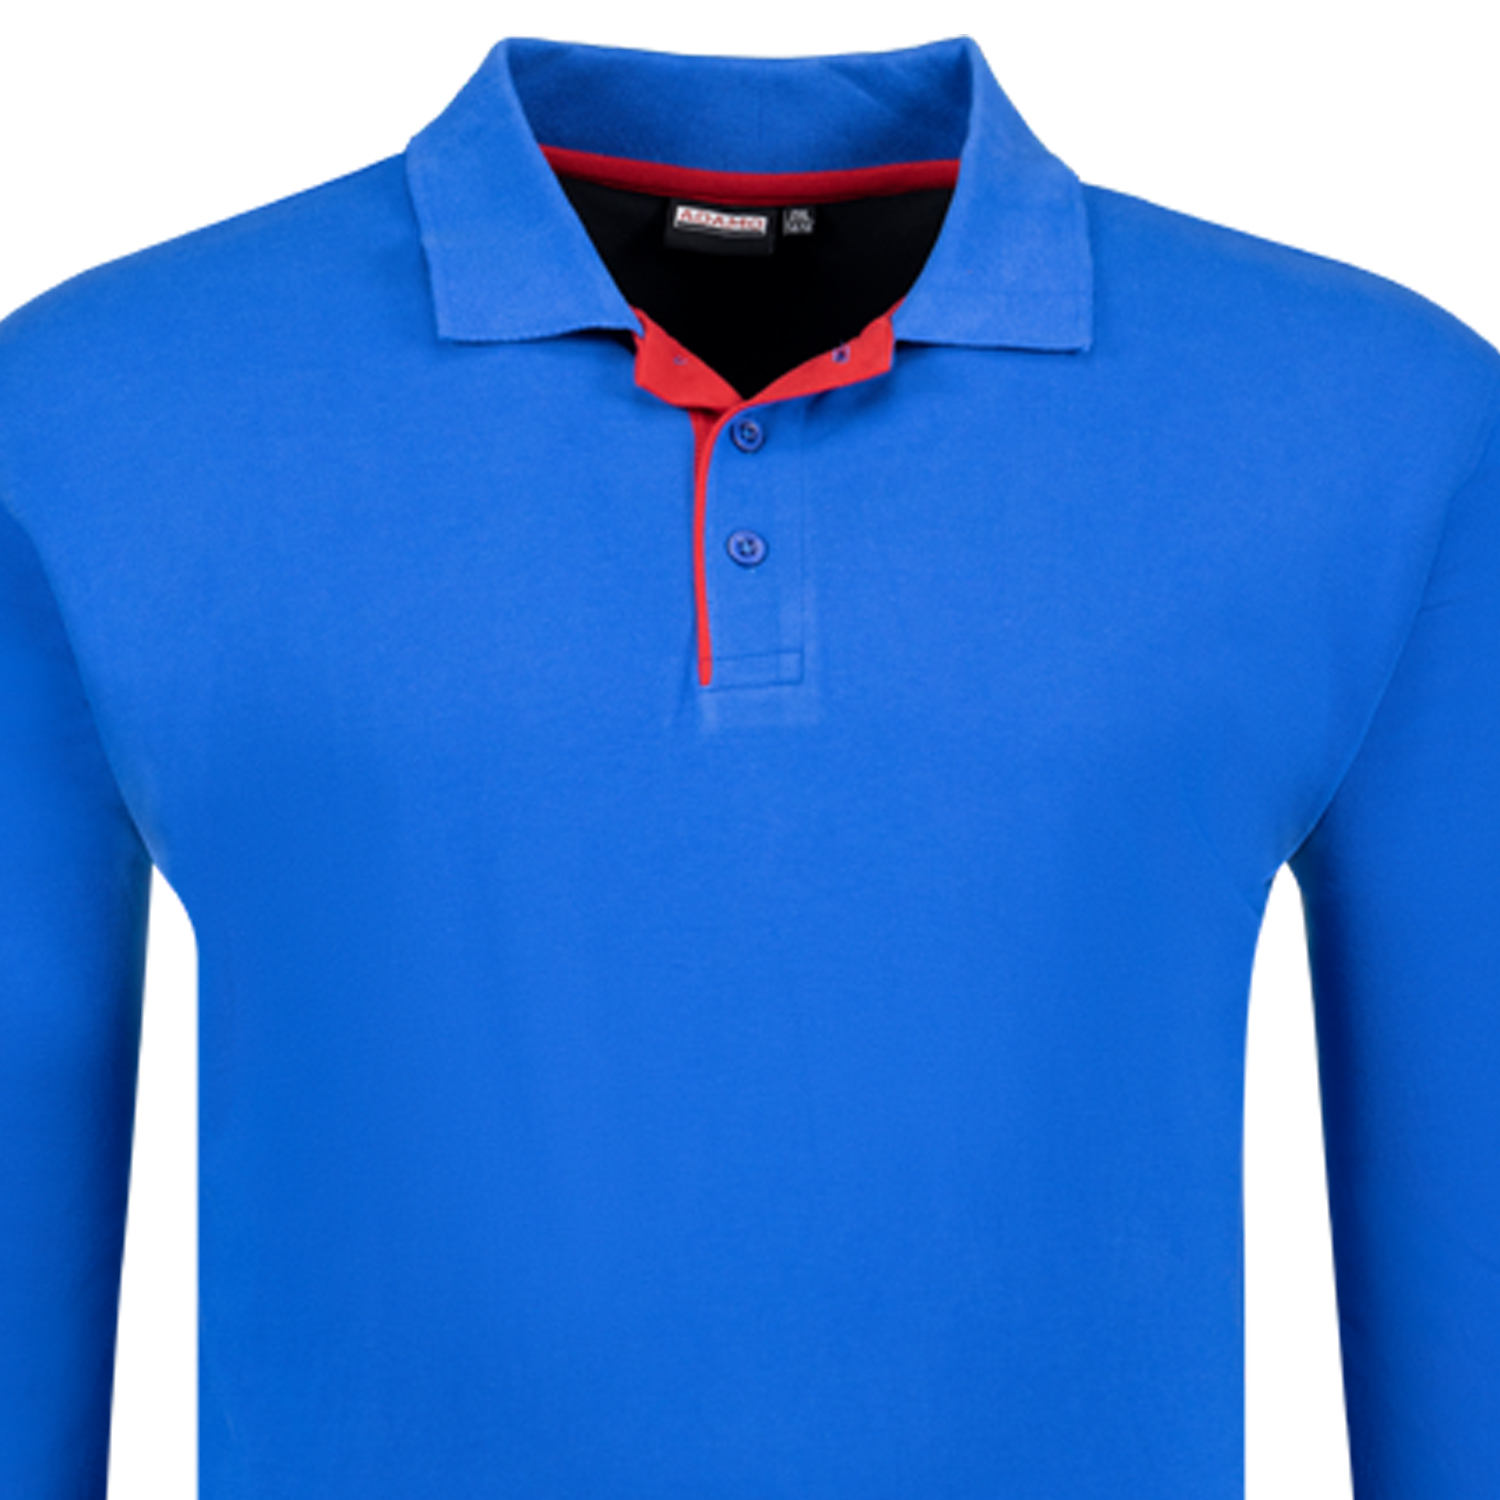 Mens Pique Poloshirt longsleeve COMFORT FIT Serie Peter from Adamo in big sizes XXL to 12XL